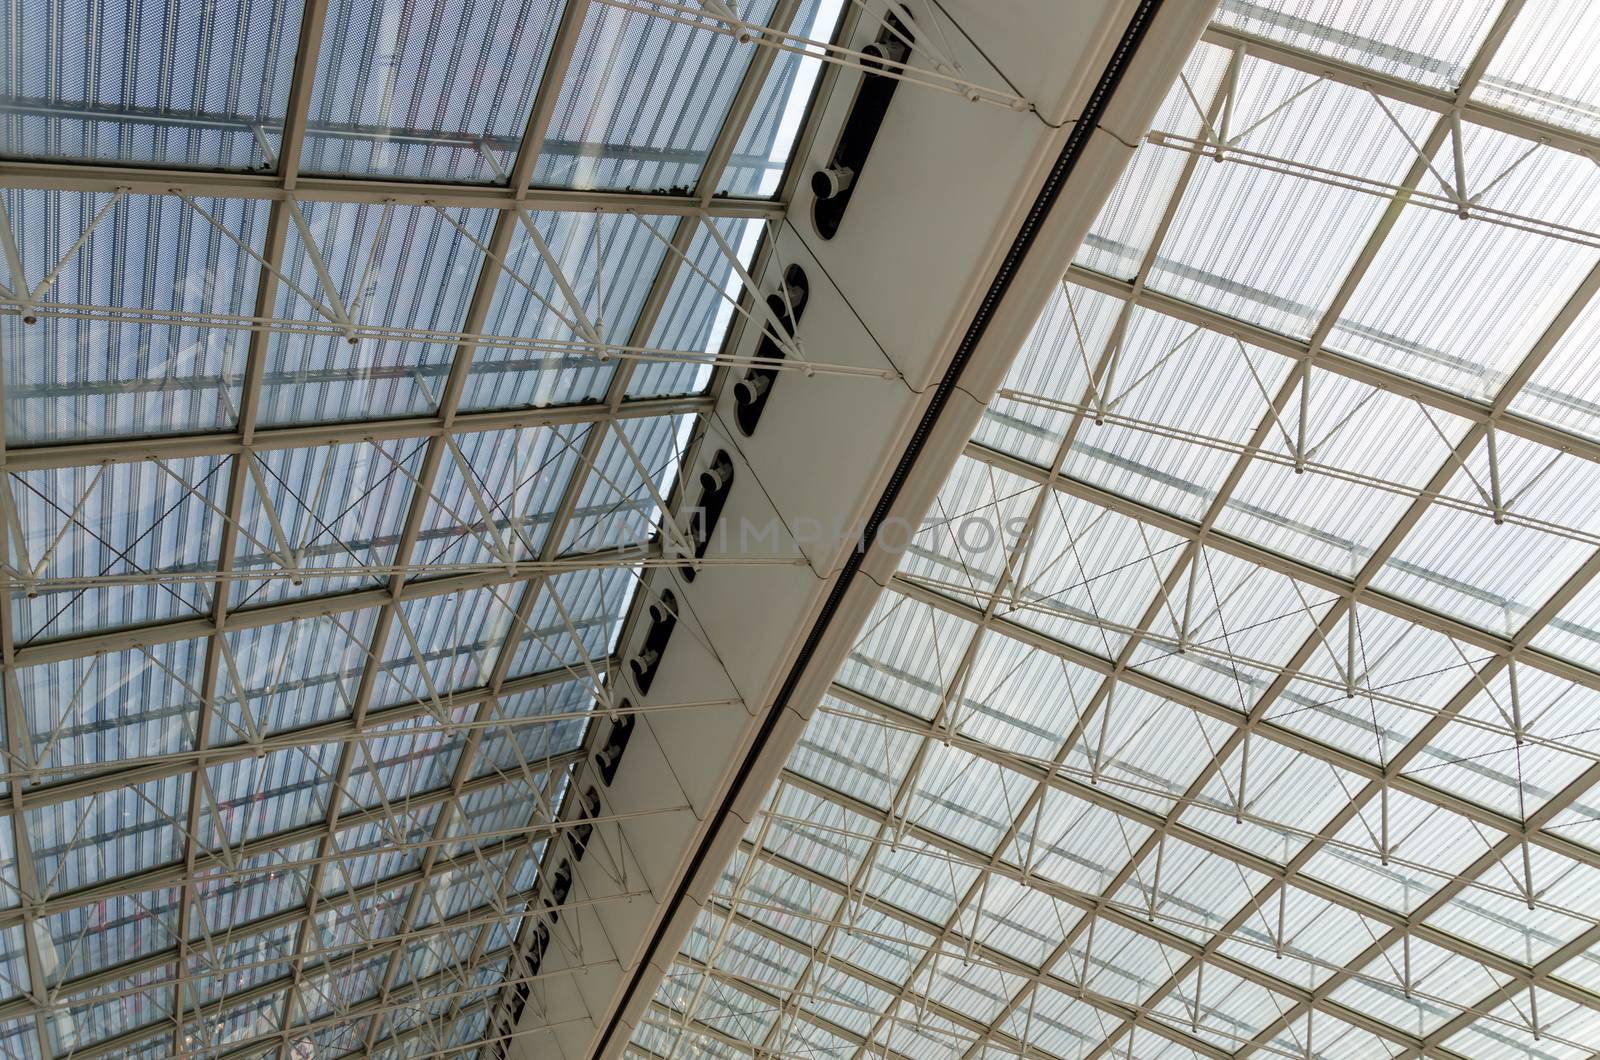 Roof Structure Detail of Charles de Gaulle airport in Paris, France